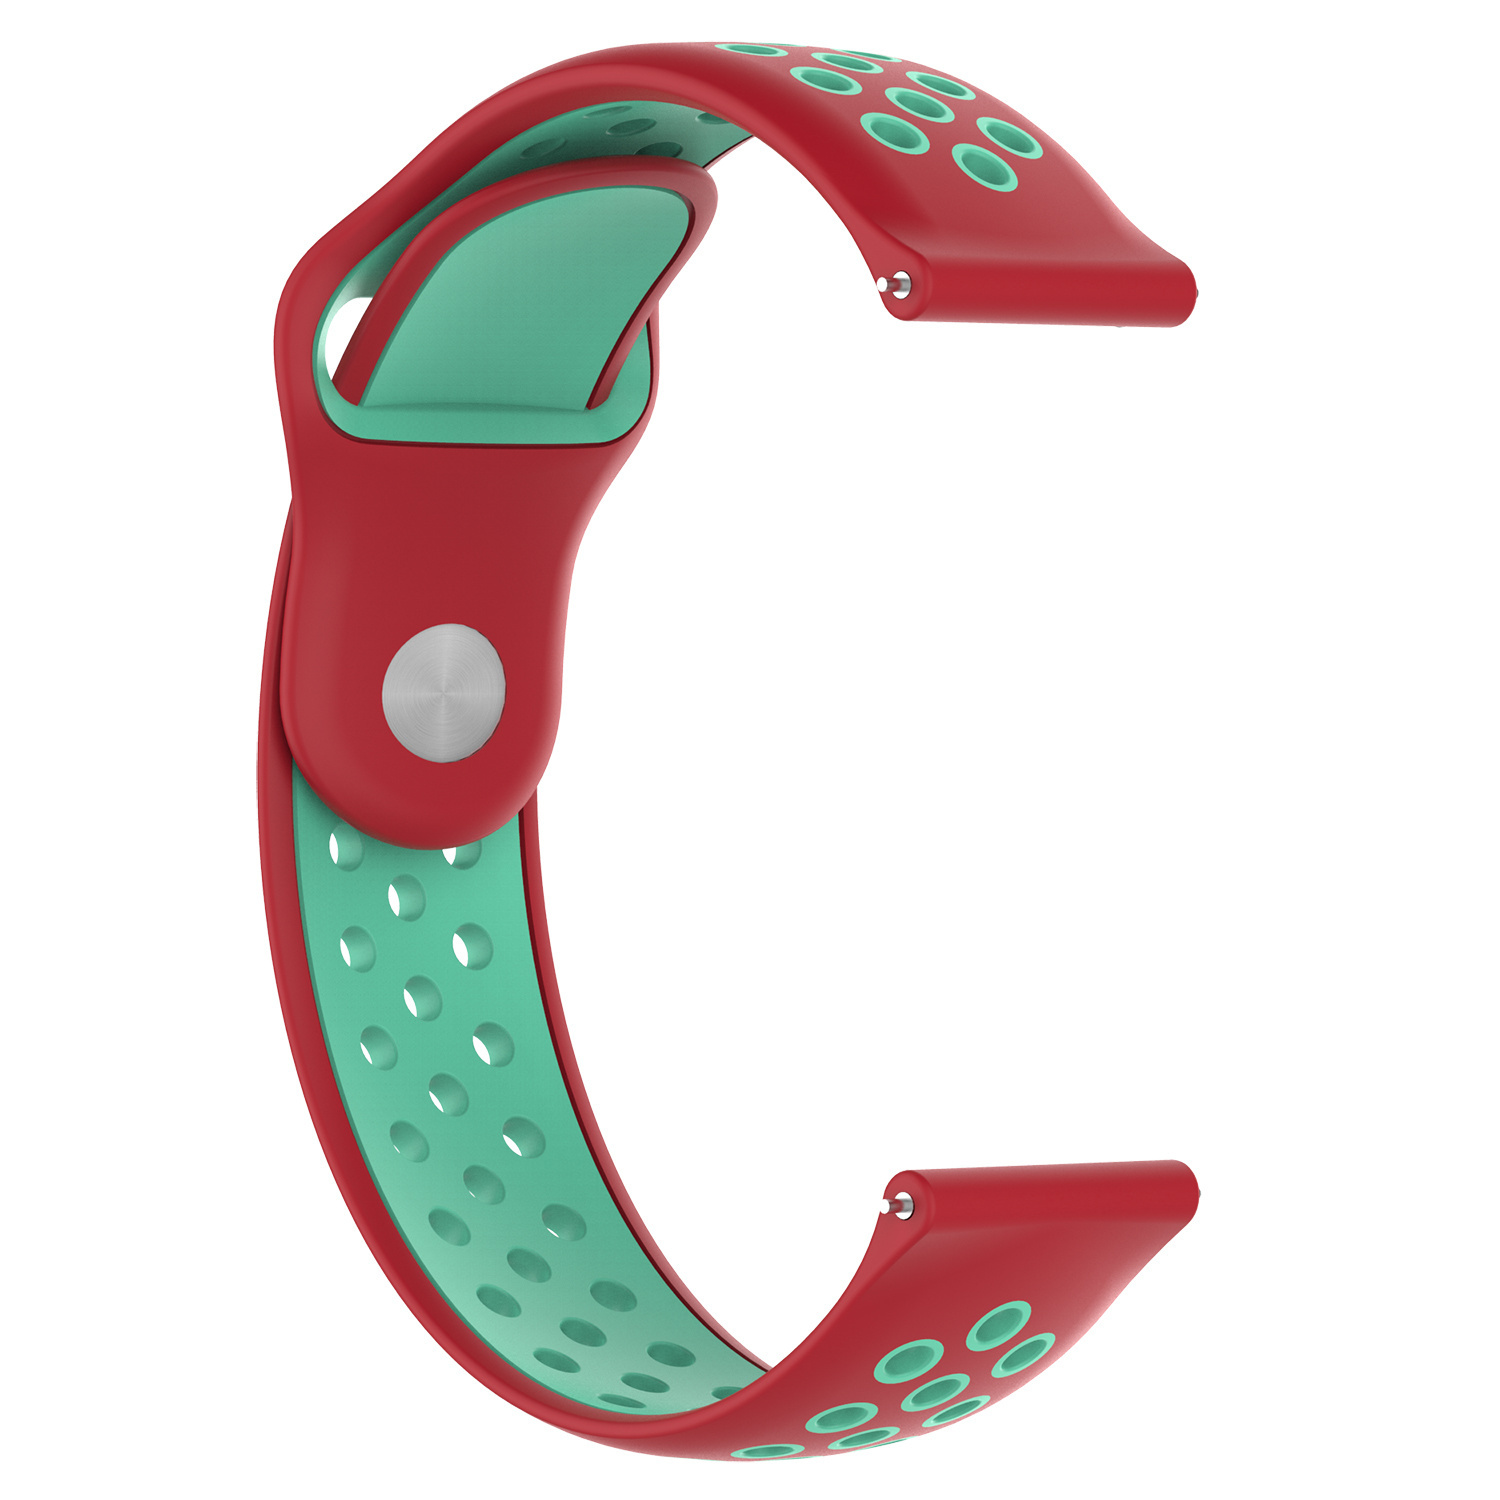 Samsung Galaxy Watch Double Sport Strap - Red Teal